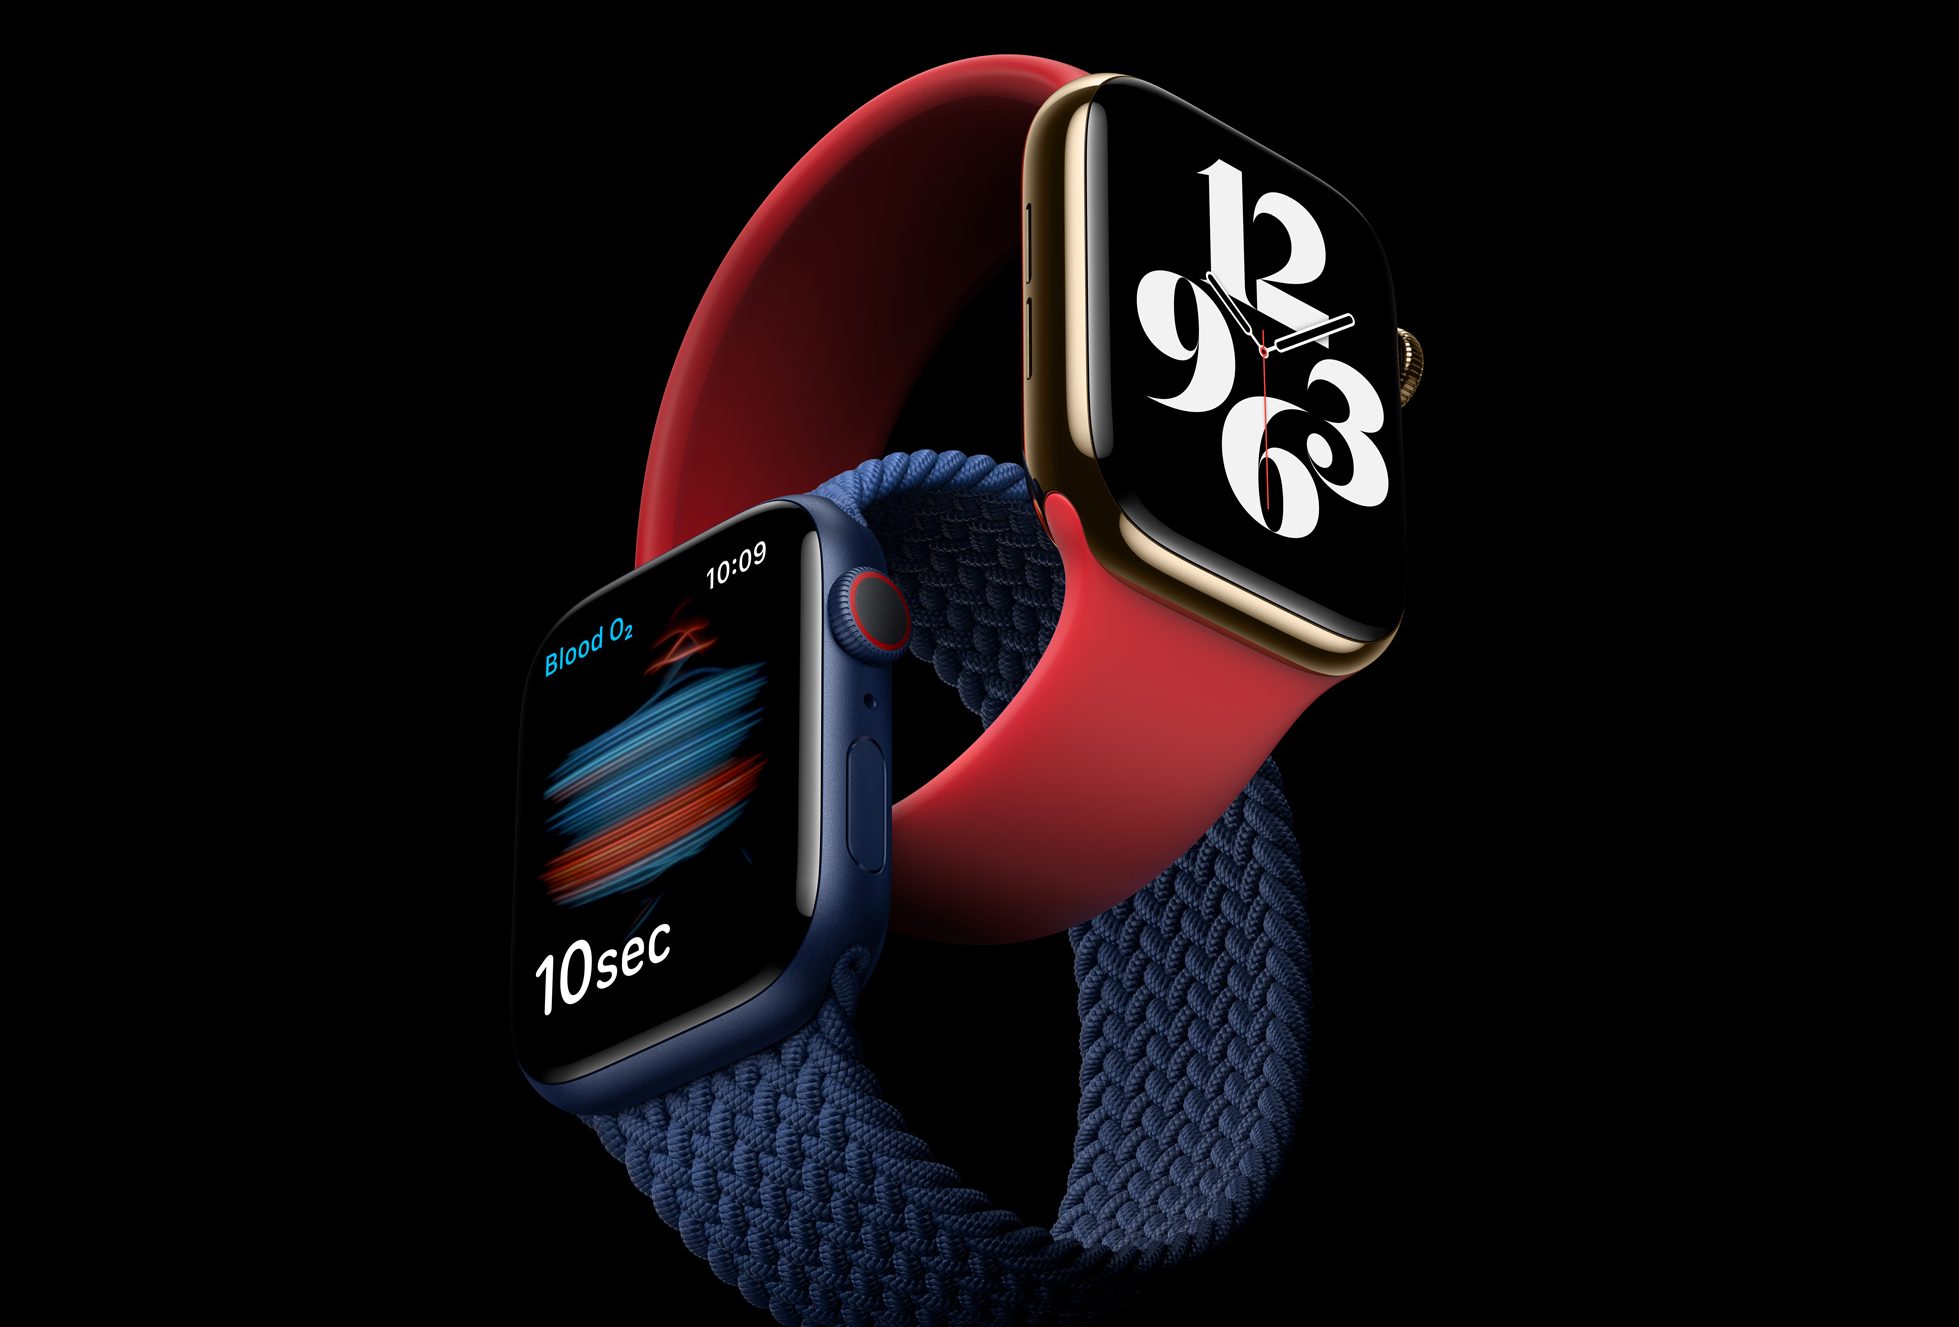 Redesigned Apple Watch Series 7 to feature new screen, faster processor